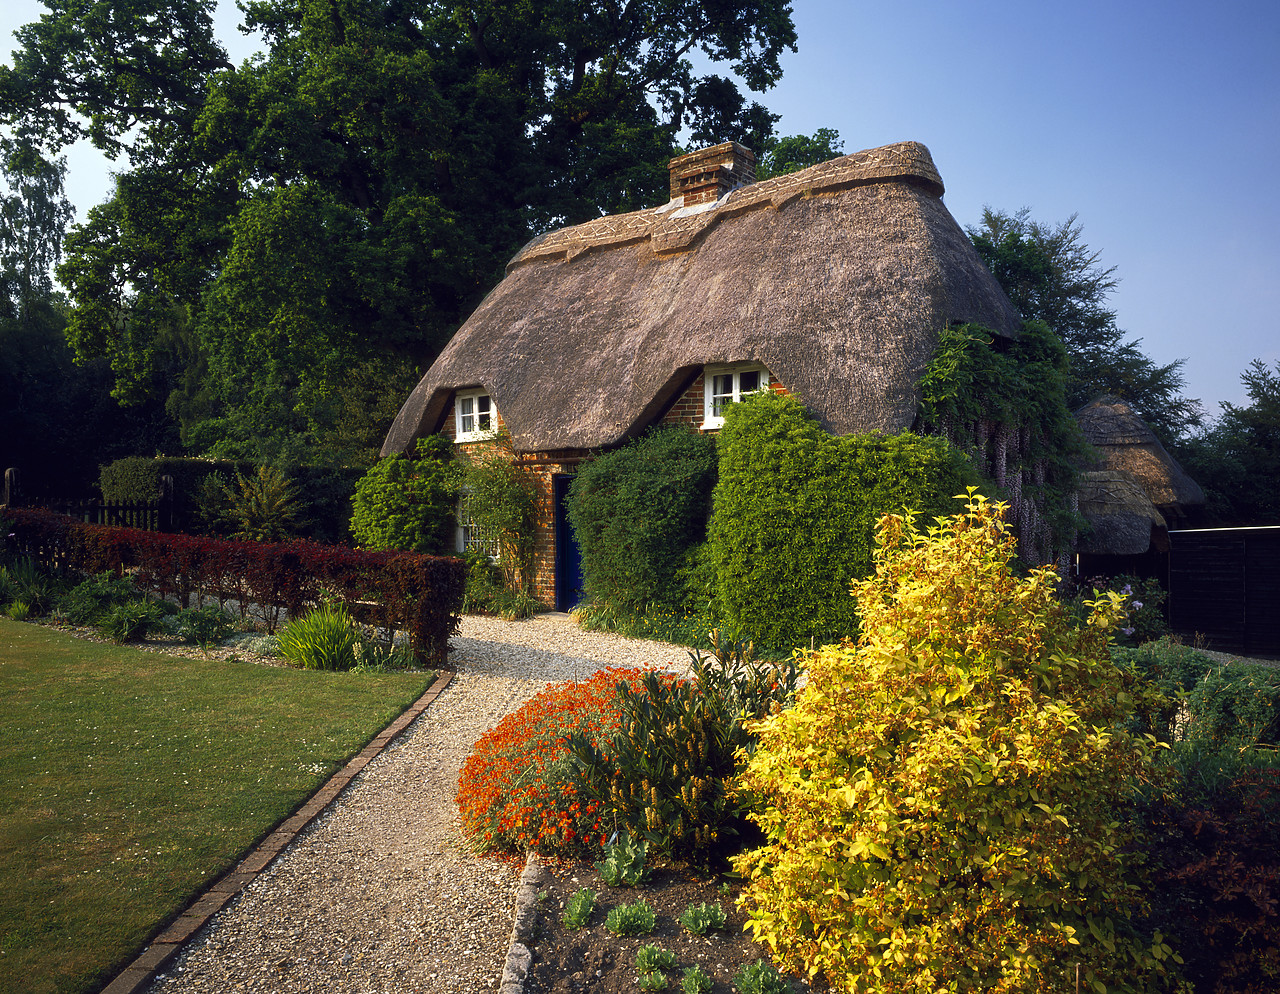 #902858-3 - Thatched Cottage, Minstead, Hampshire, England